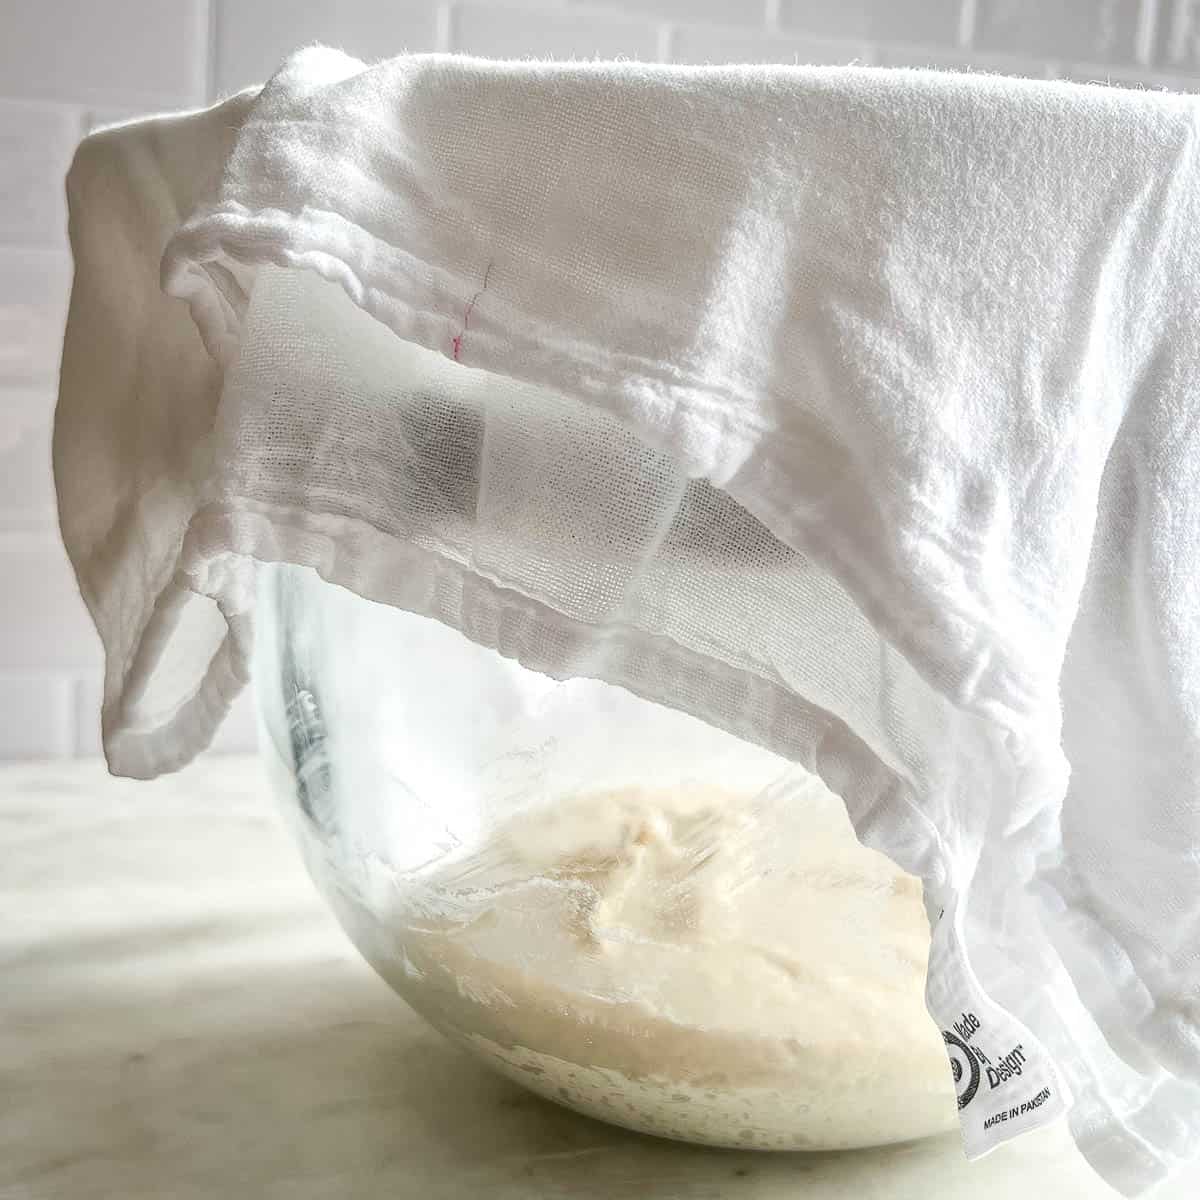 Cinnamon Roll dough in a clear glass stand mixing bowl with a white towel covering it for the first rise.